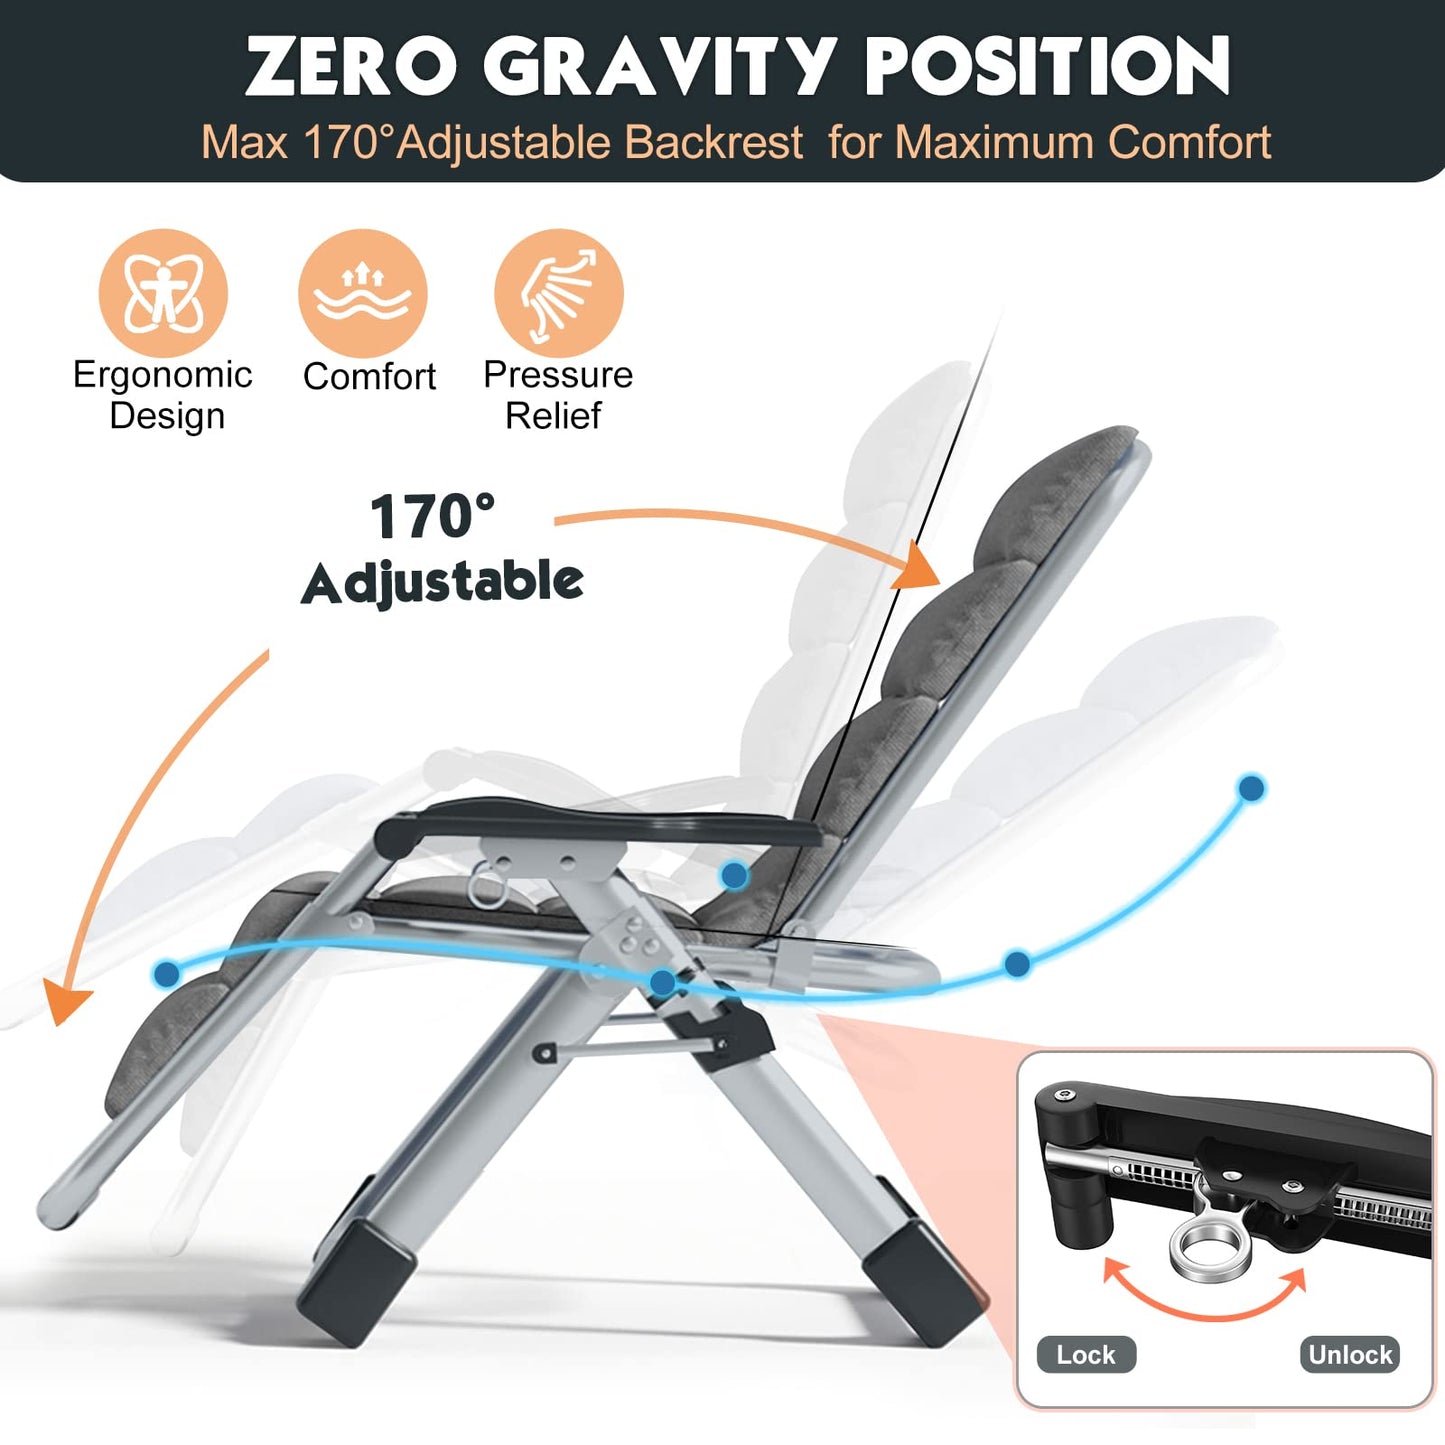 MOPHOTO Zero Gravity Chair, Outdoor Padded Lounge Chair with Side Table, Zero Gravity Recliner Chair, Outdoor Reclining Chair, Sturdy & Comfortable, Supports up to 440lbs Line Gray Zero Gravity Chair-2PK